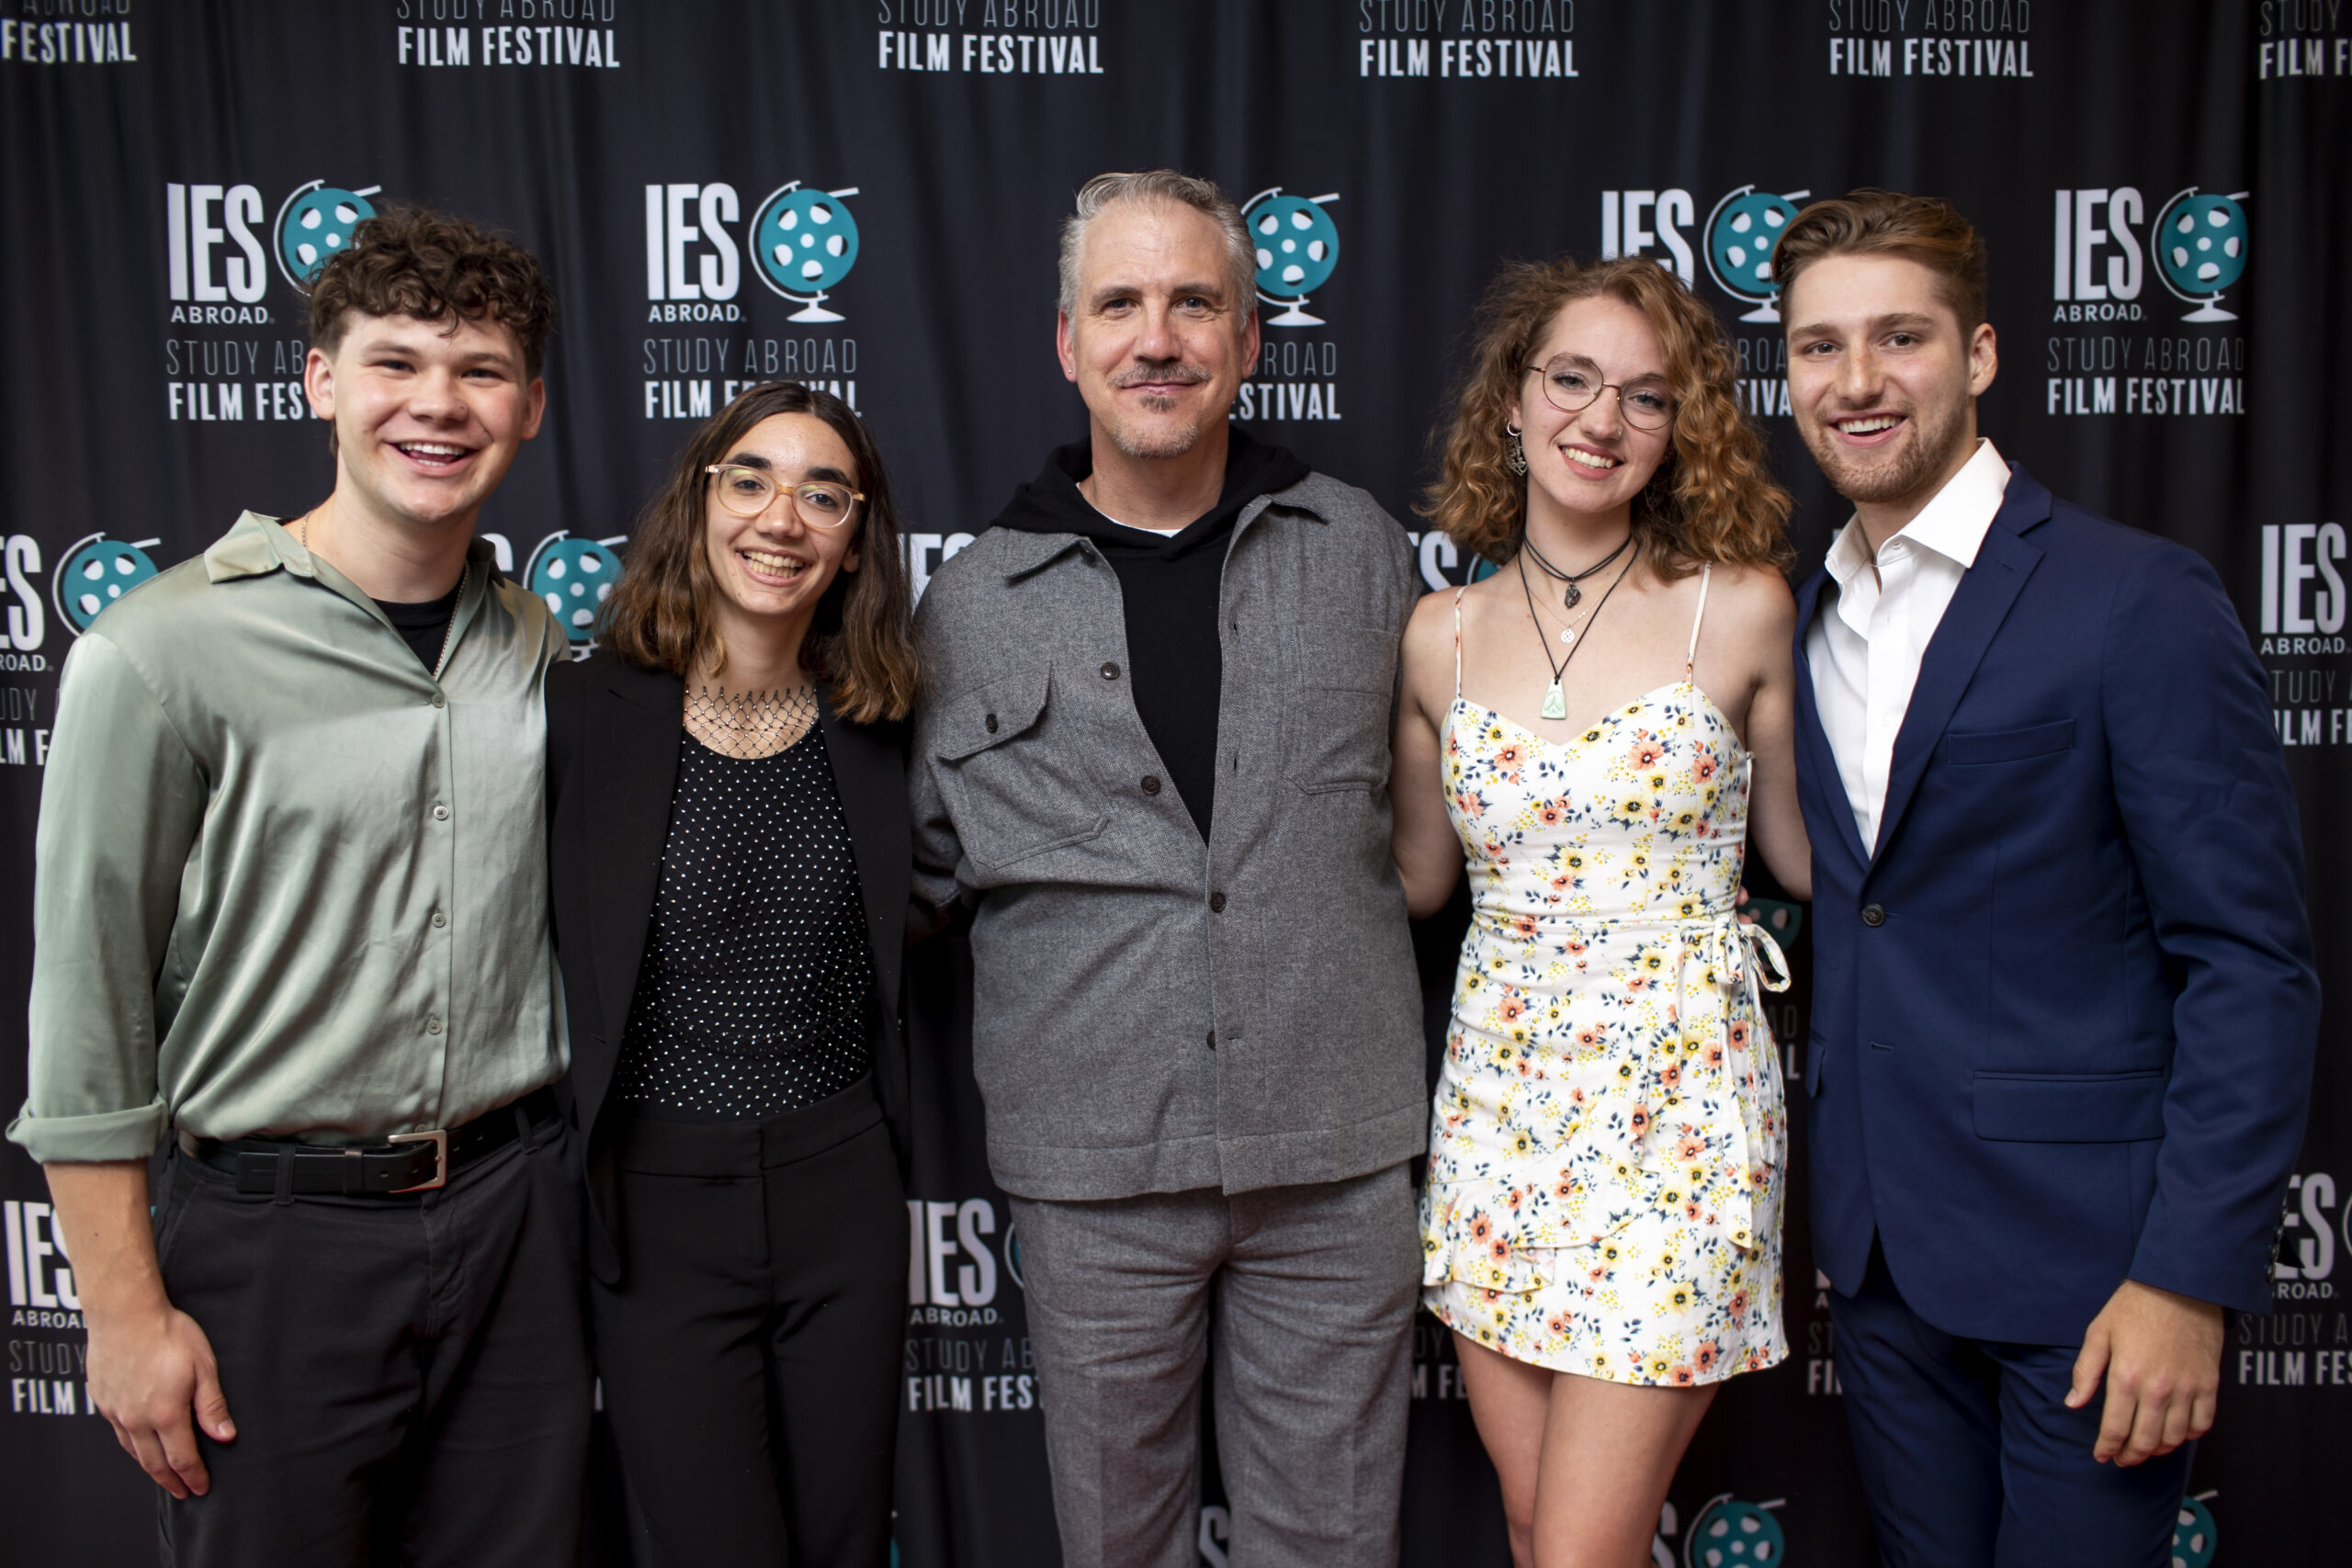 Samantha Stidham (second from right) with other IES Abroad Study Abroad Film Festival finalists.